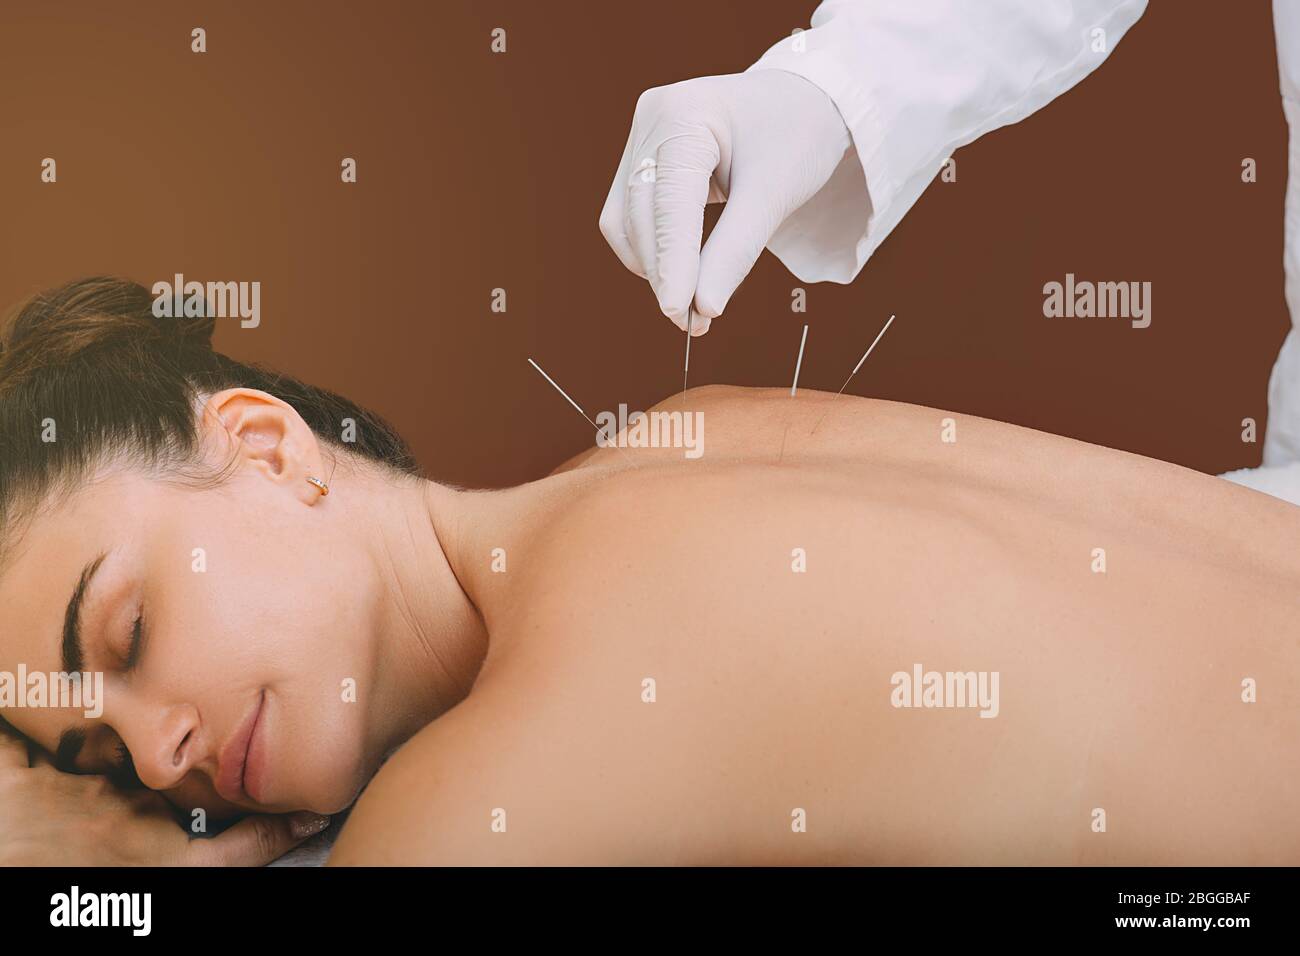 Acupunturist hand with acupuncture needle. Acupuncture treatment of chronic back pain of a woman Stock Photo